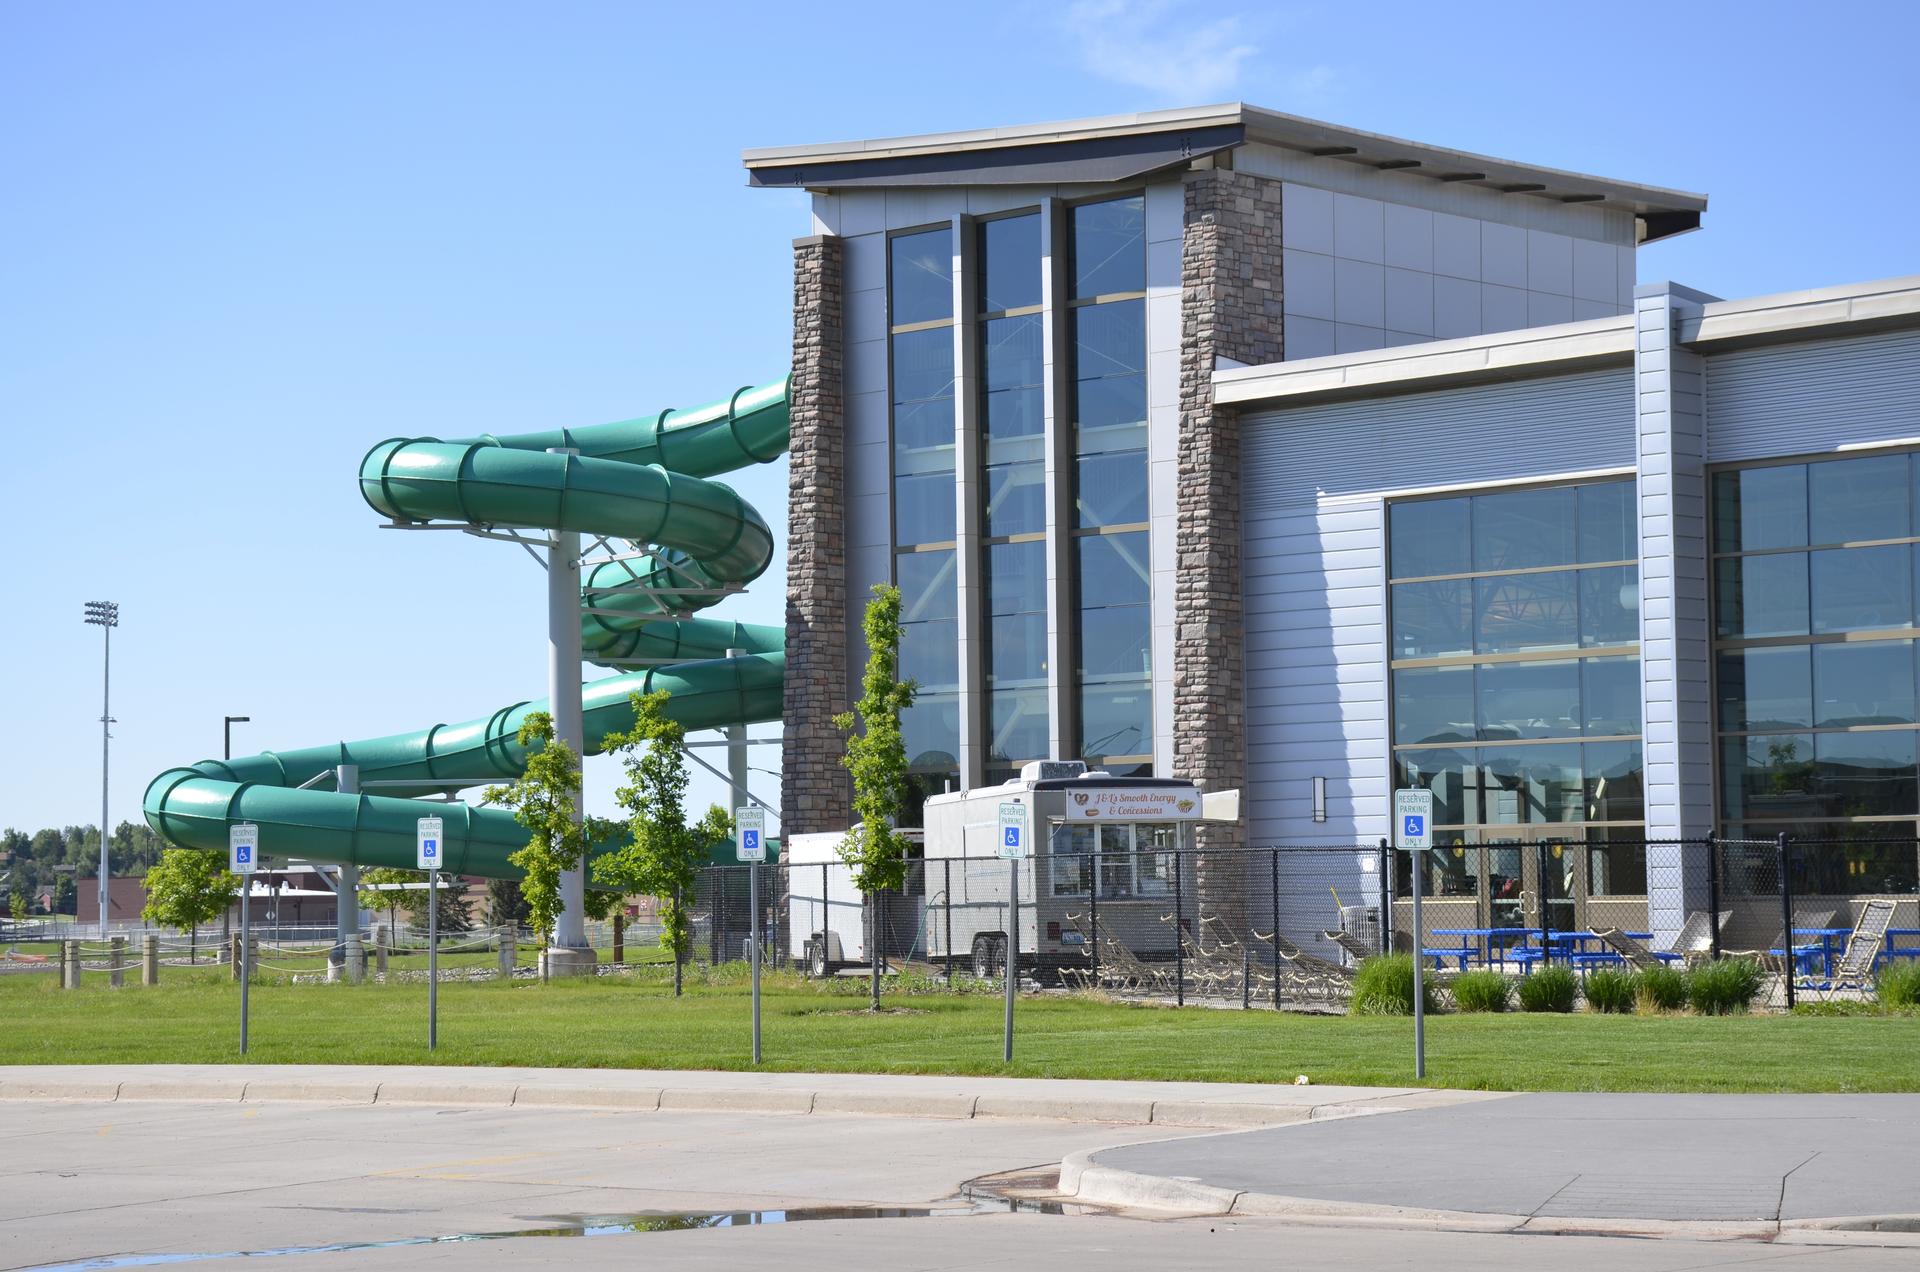 The Campbell County Recreation Center opened in 2010. The 190,000 square-foot facility has a 40-foot climbing wall built to resemble Devil’s Tower, indoor track, lazy river and two water slides.